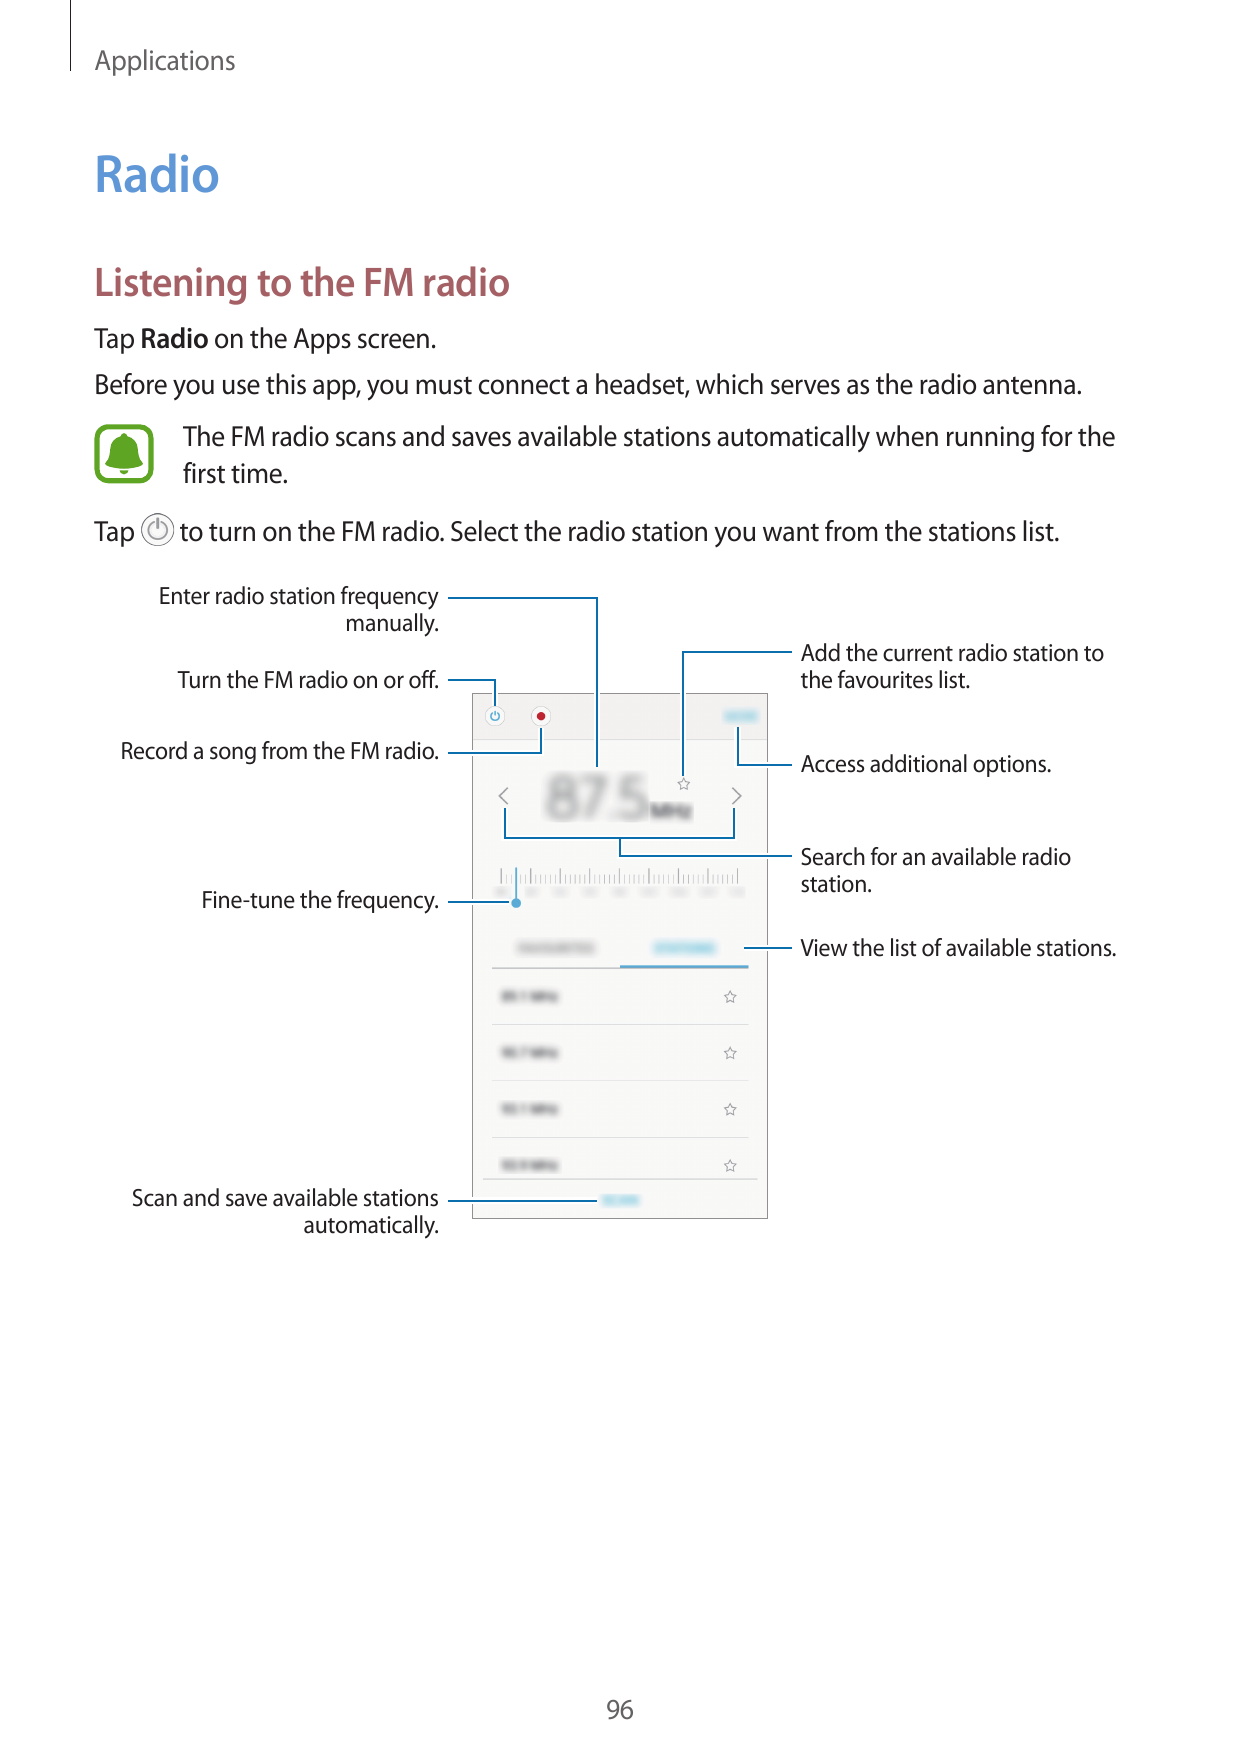 ApplicationsRadioListening to the FM radioTap Radio on the Apps screen.Before you use this app, you must connect a headset, whic